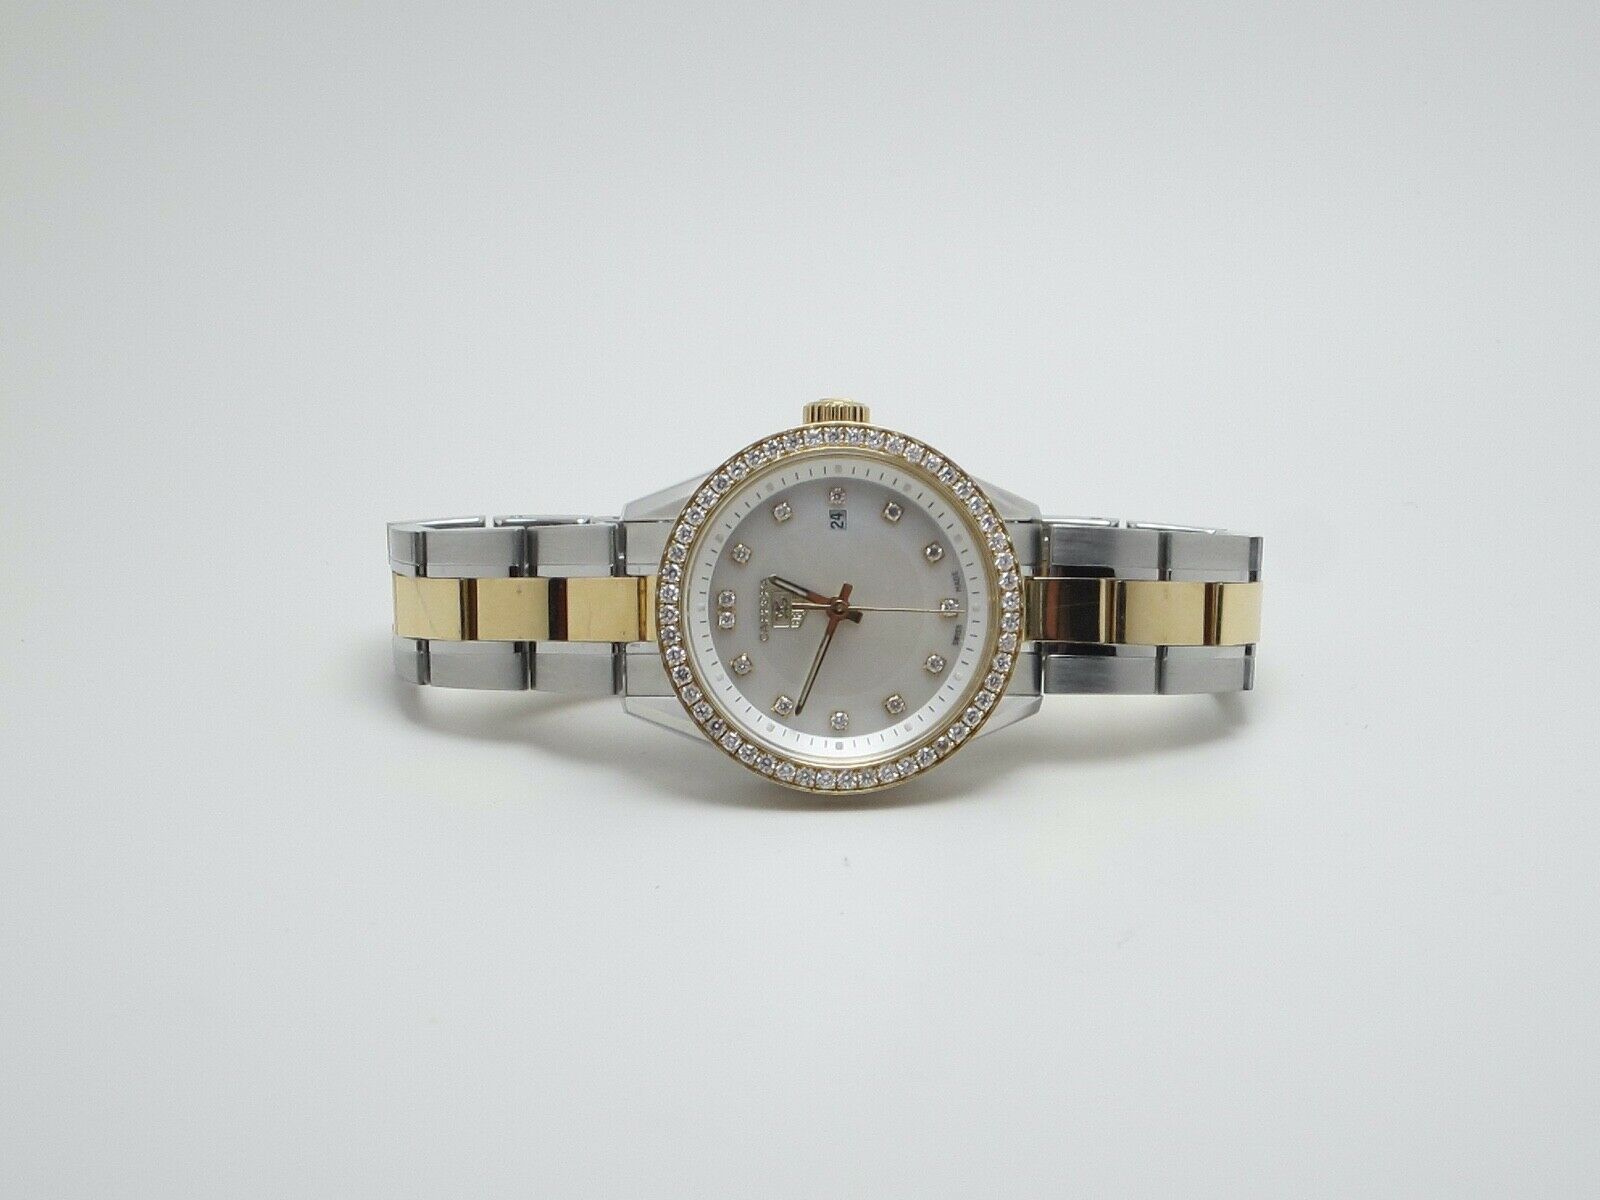 Tag Heuer Women's WV1450.BD0797 Carrera Mother of Pearl Dial Watch